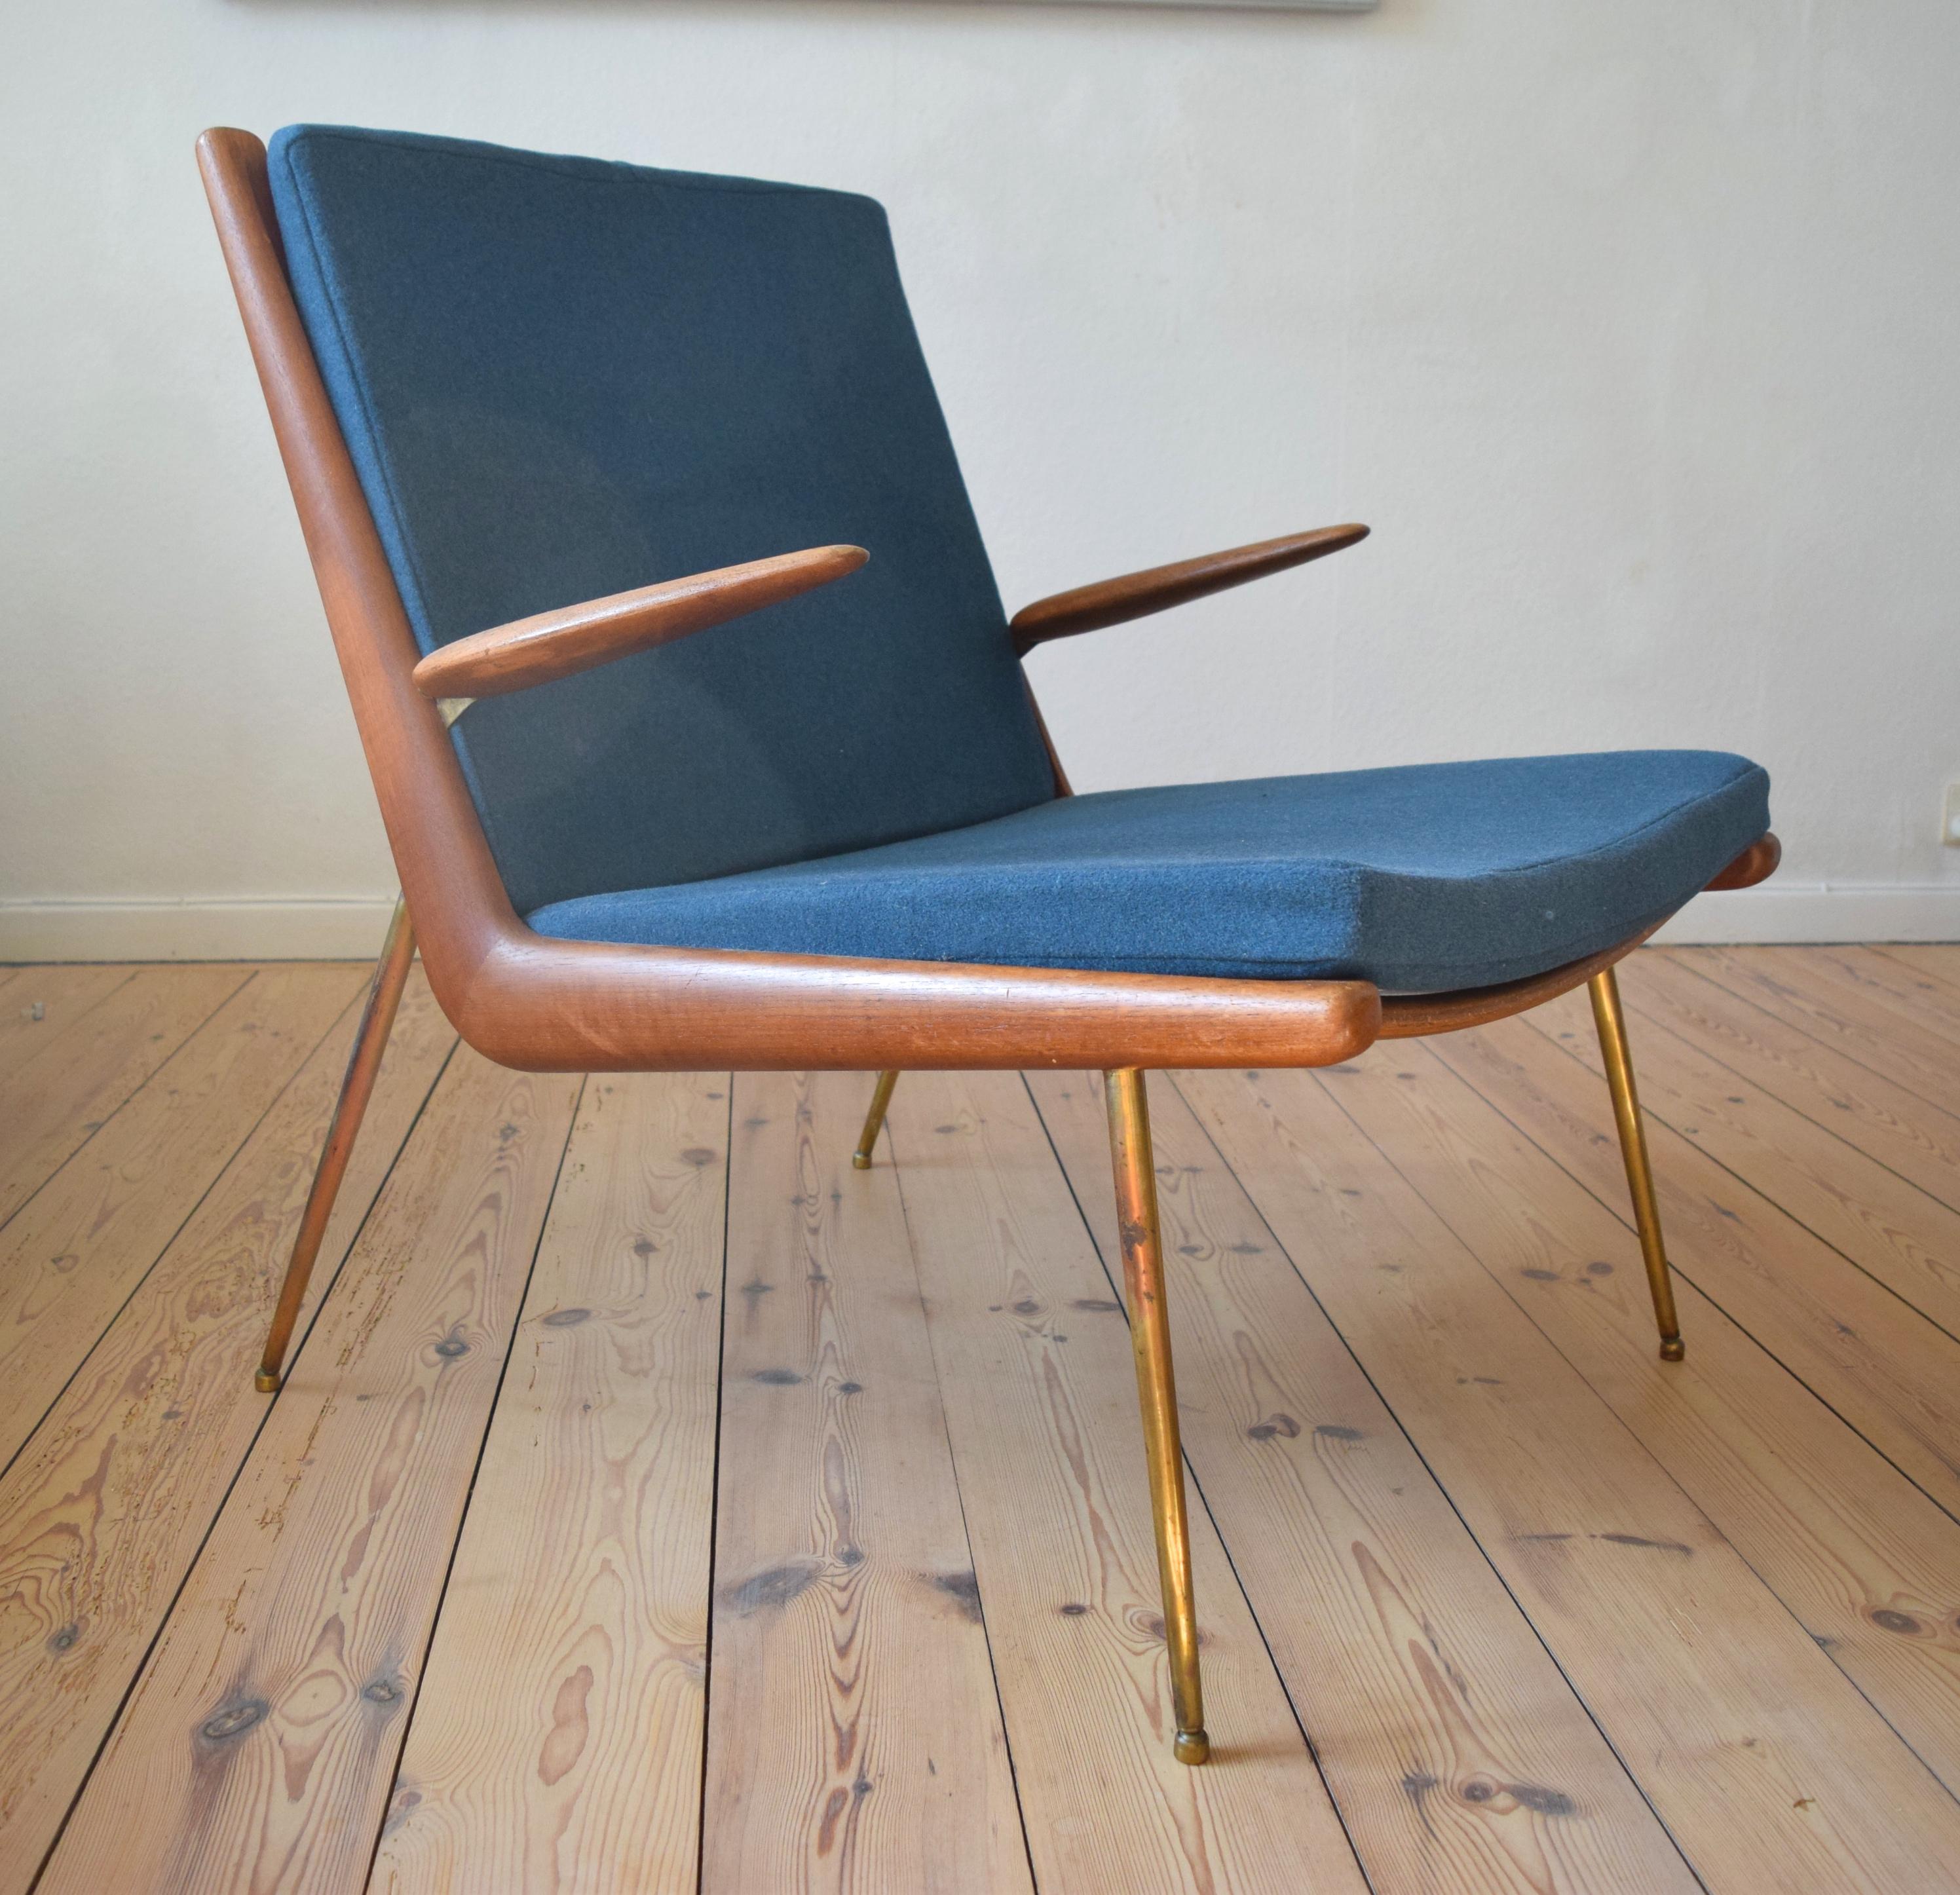 Peter Hvidt & Orla Molgaard-Nielsen

FD-135 boomerang chair, circa 1959.

Produced by France & Daverkosen, Denmark. Teak frame with steel legs and fittings. This iconic chair consist of a boomarang-shaped frame, resting on brass-colored metal